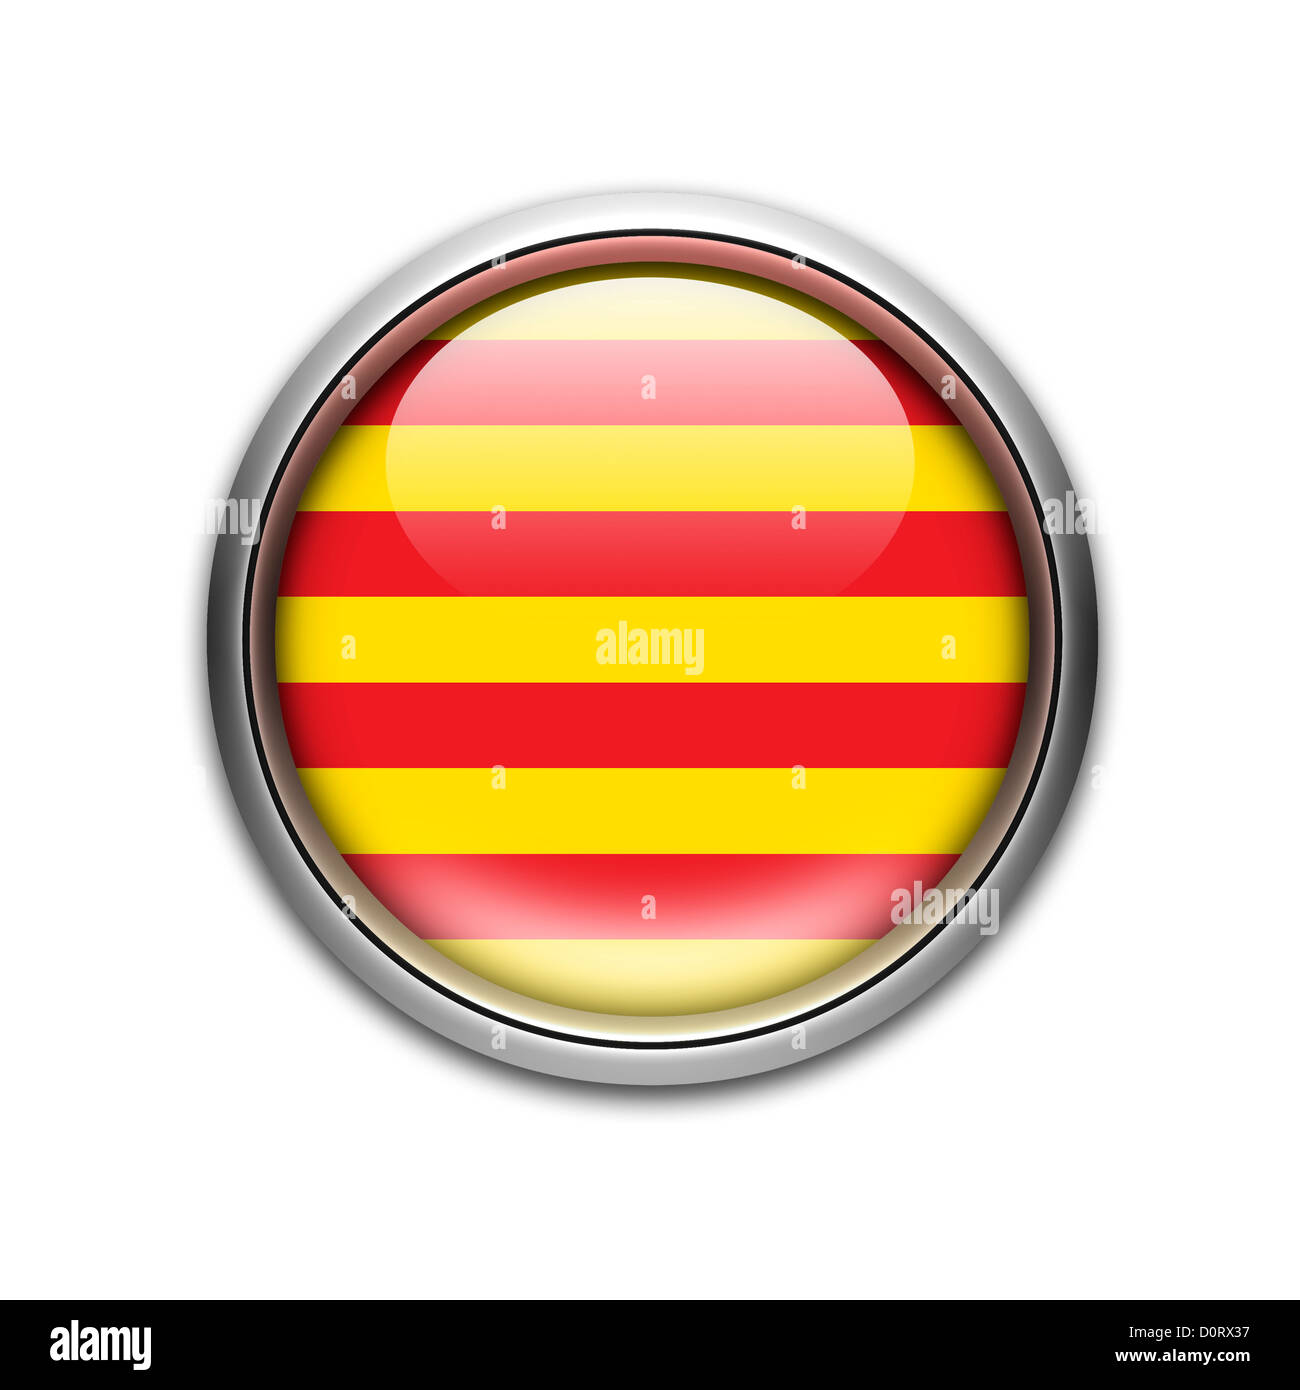 Catalan Symbol High Resolution Stock Photography and Images - Alamy